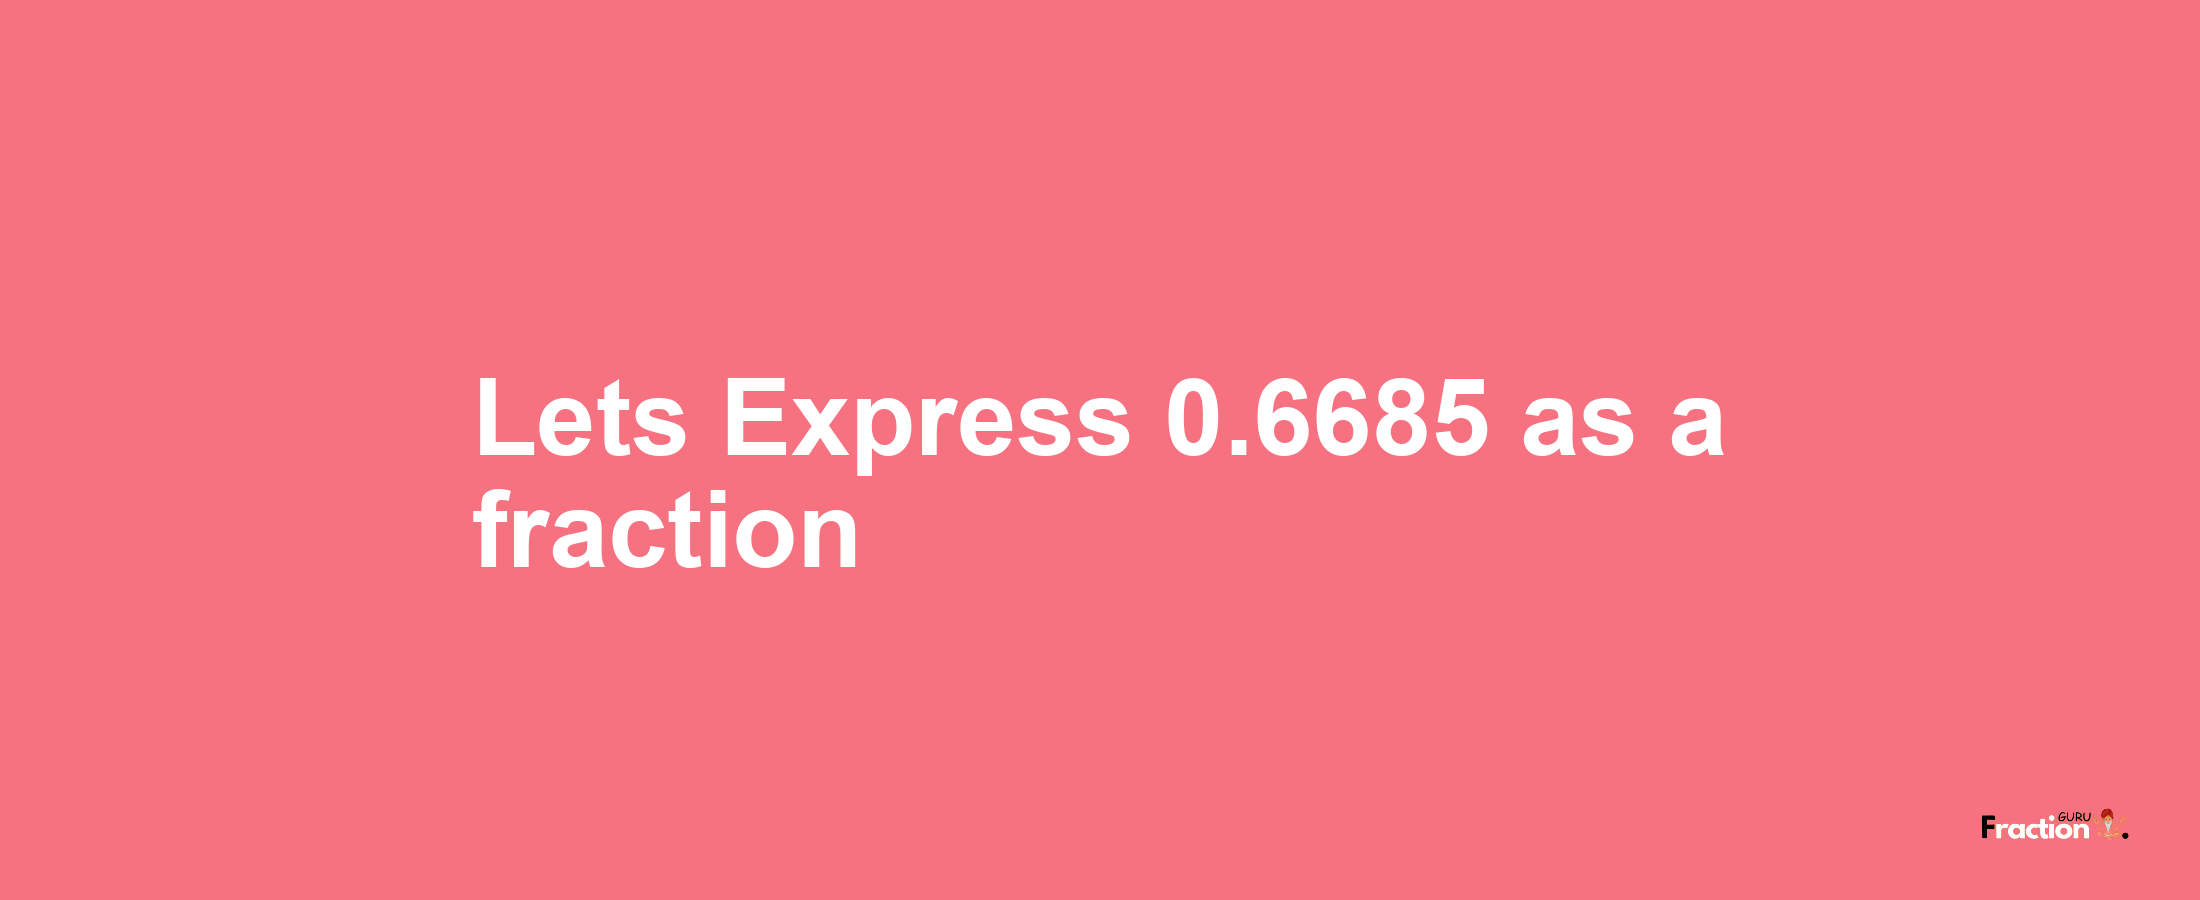 Lets Express 0.6685 as afraction